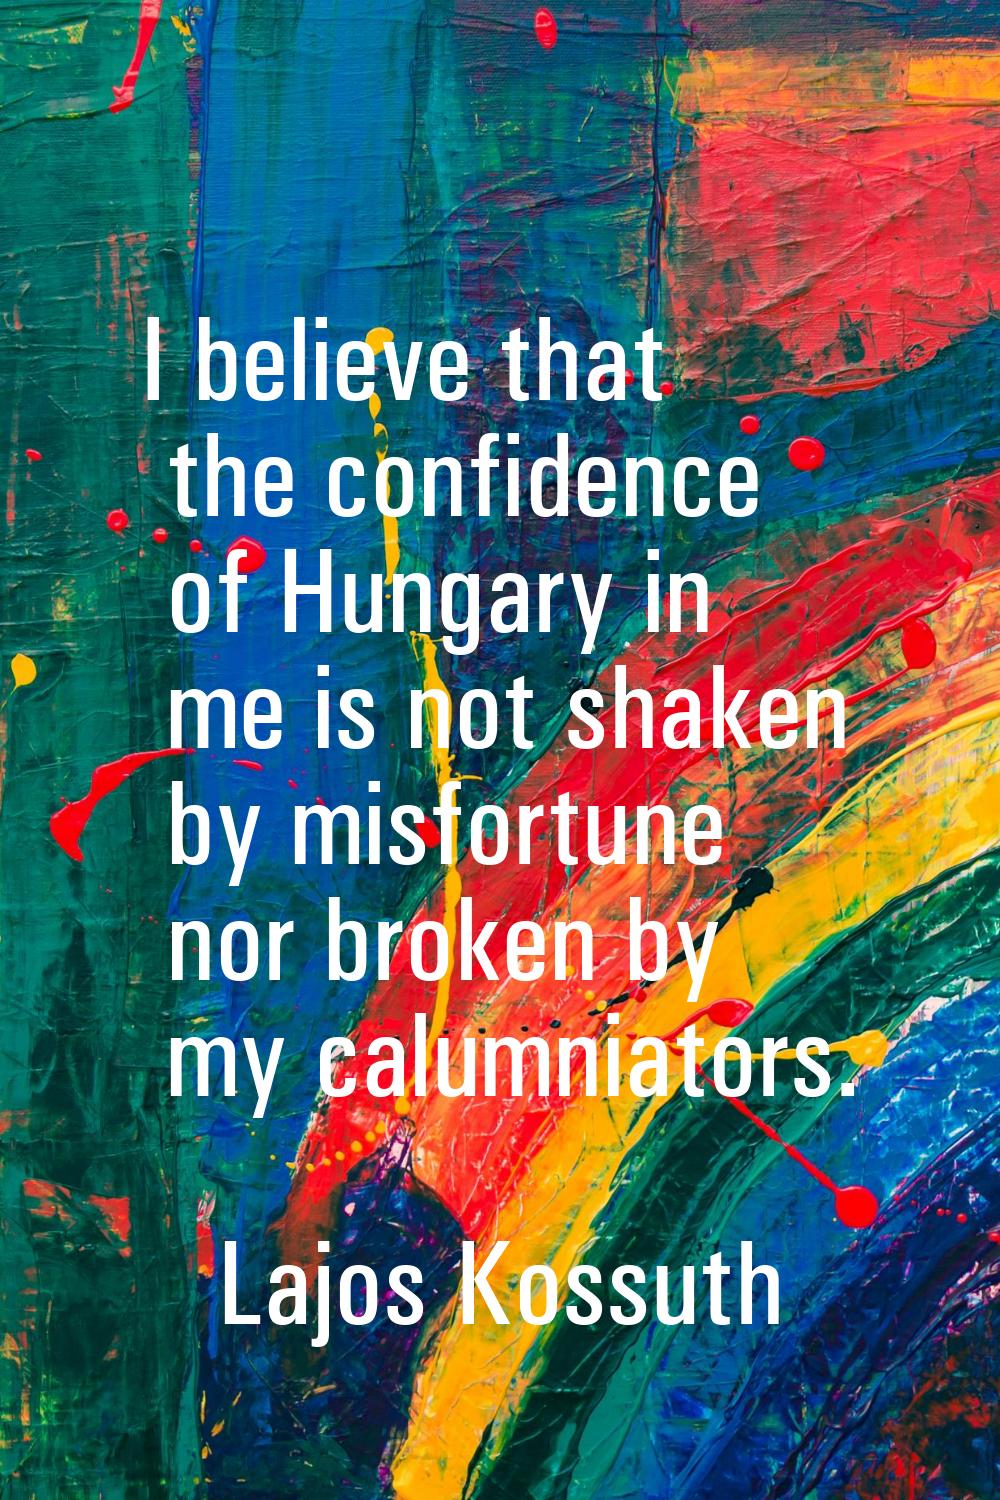 I believe that the confidence of Hungary in me is not shaken by misfortune nor broken by my calumni